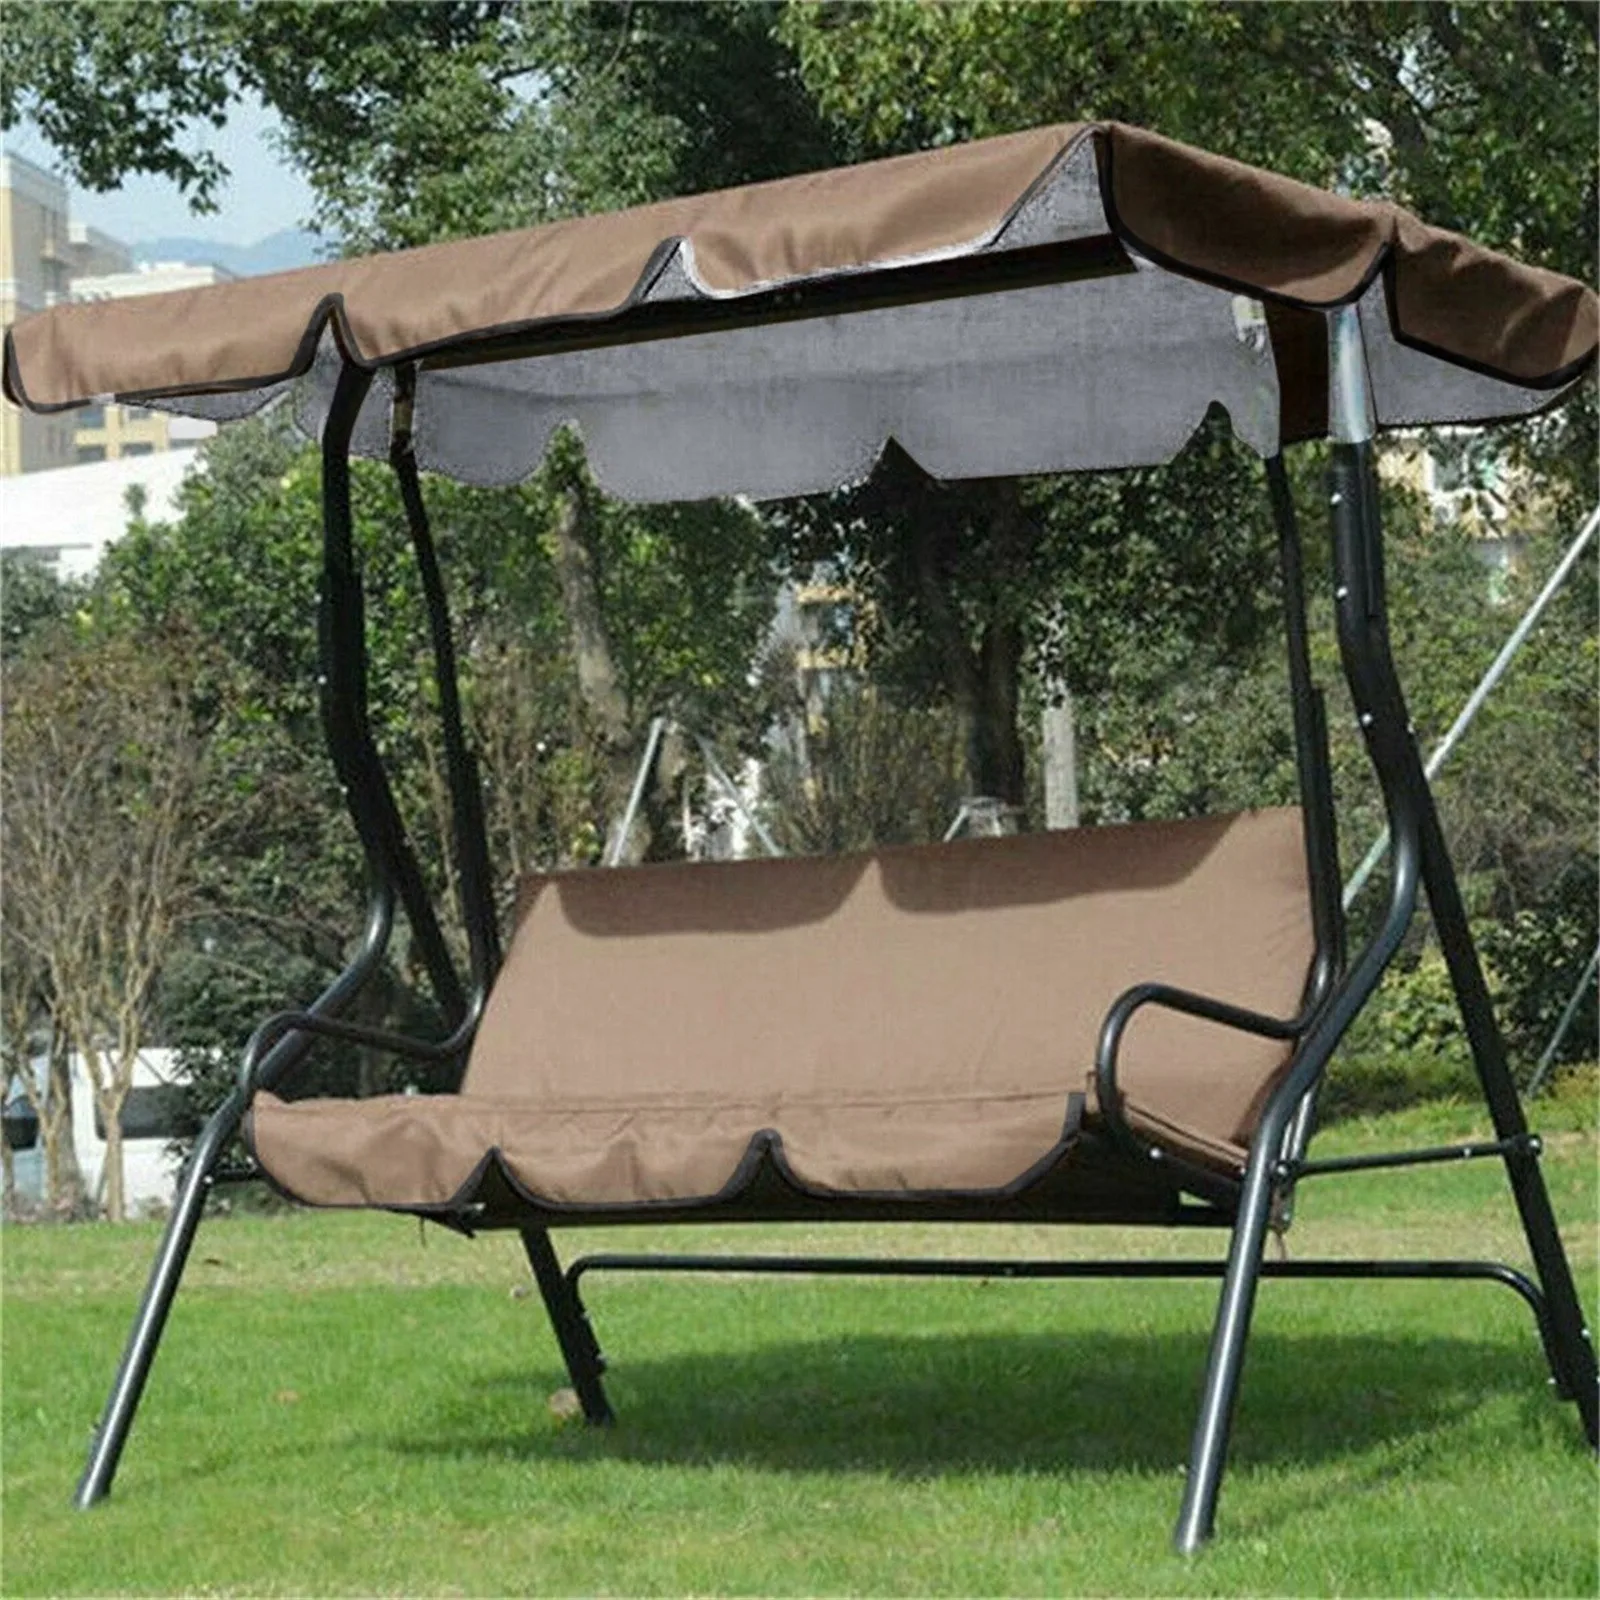 Outdoor Replacement Canopy Cover For Swing Seat Garden Hammock Cover New 